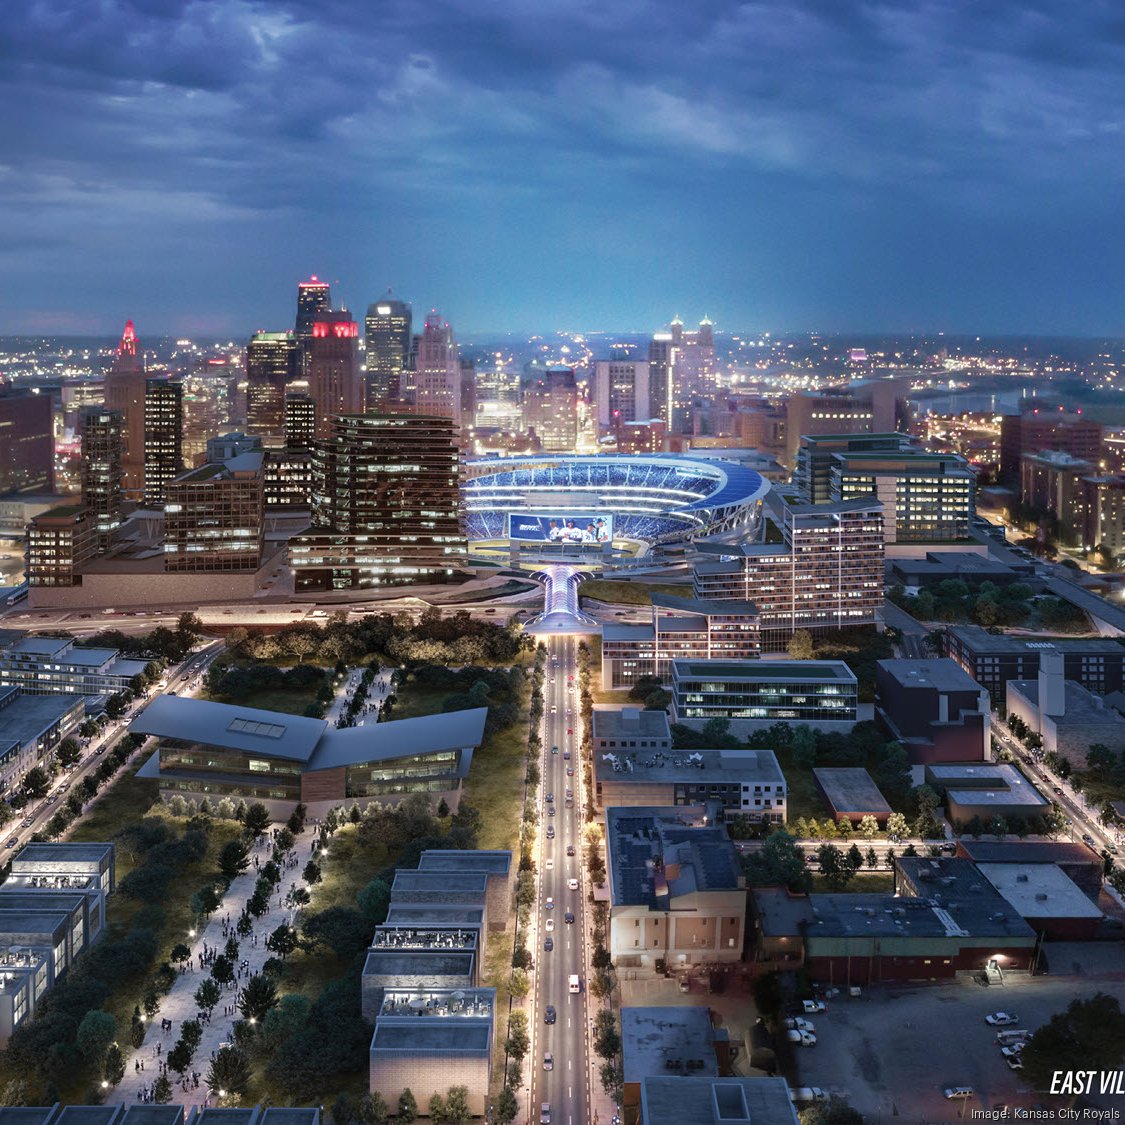 The Royals previewed what a new stadium might look like. Now they